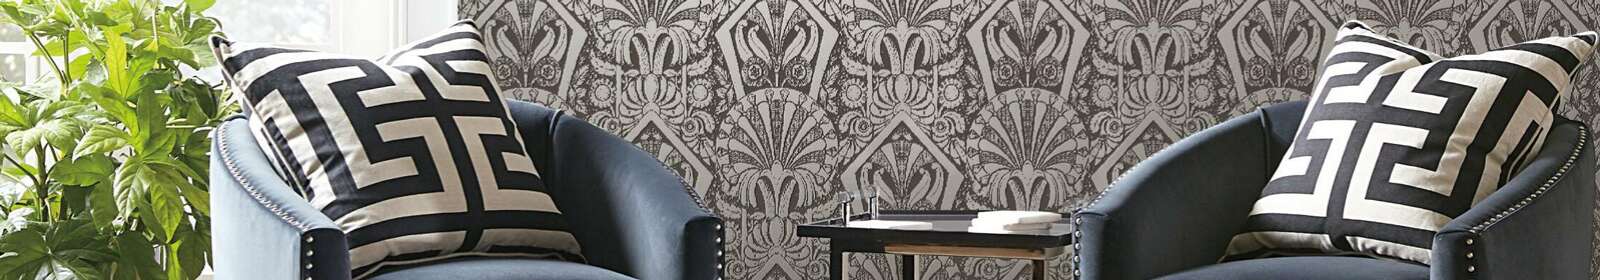 York Wallcoverings SS1798SMP Wall In A Box Zebra Accentuated Wallpaper Memo Sample 8-Inch x 10-Inch 